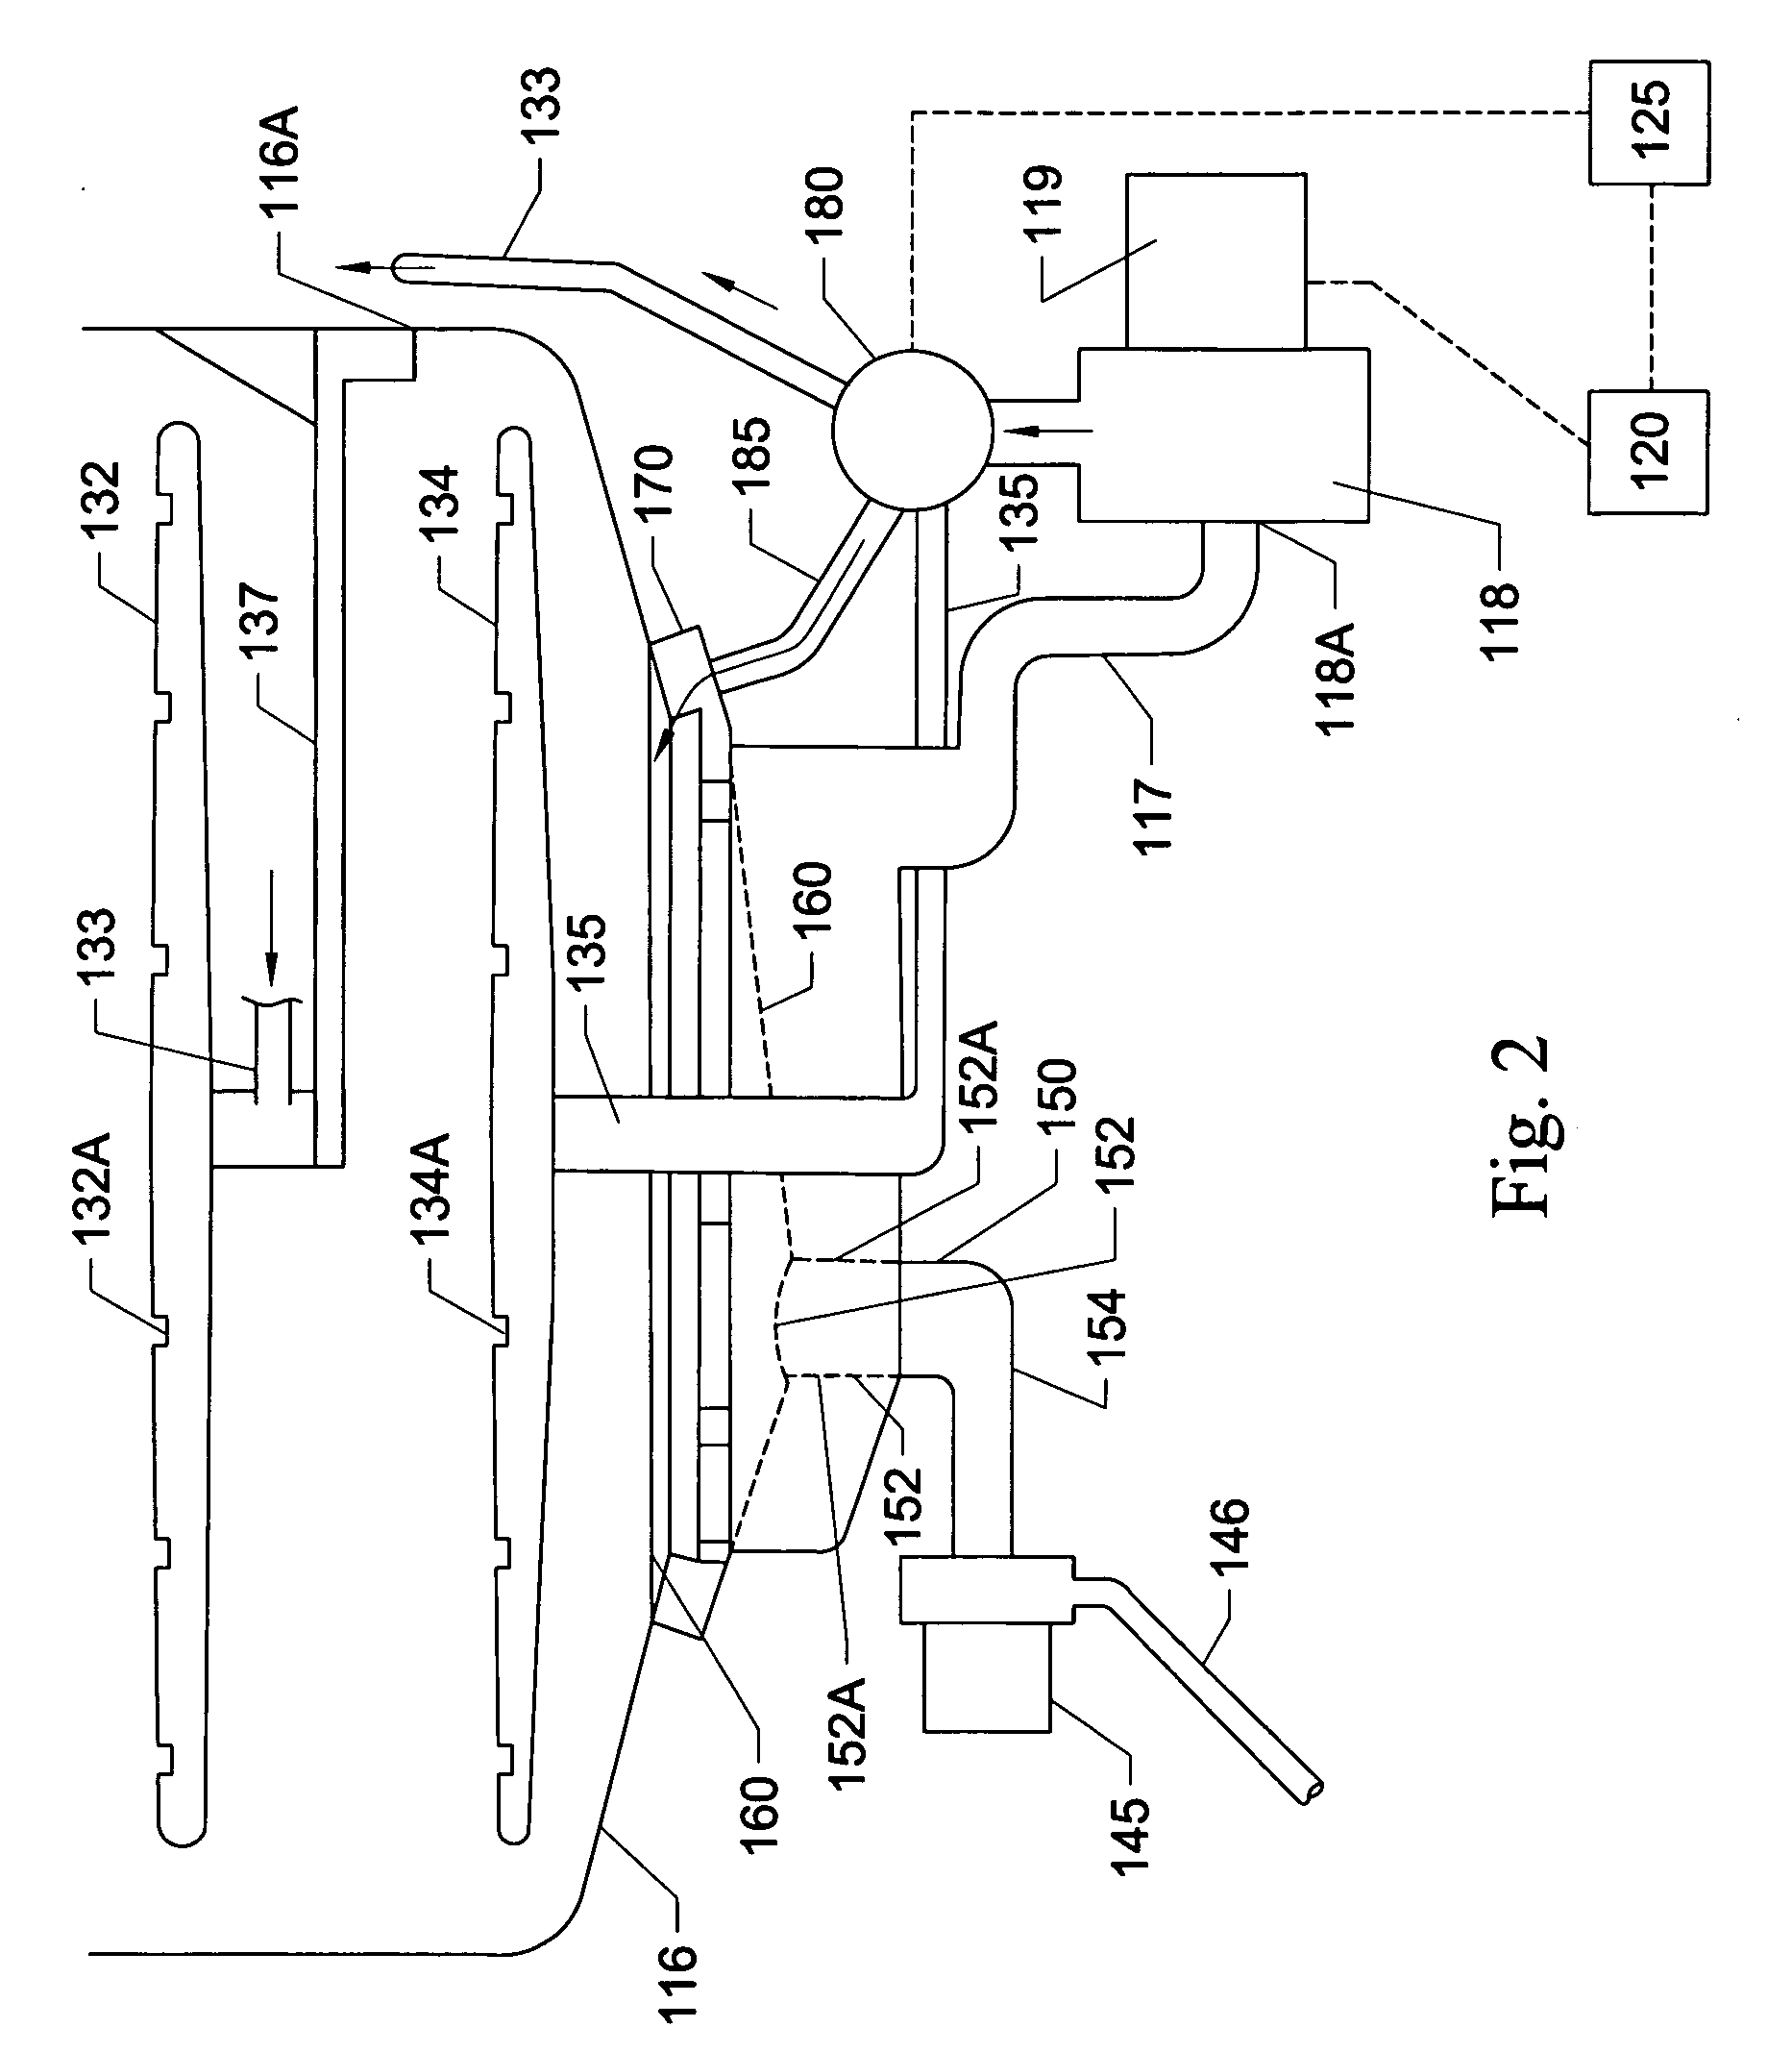 Primary filter cleaning system for a dishwasher